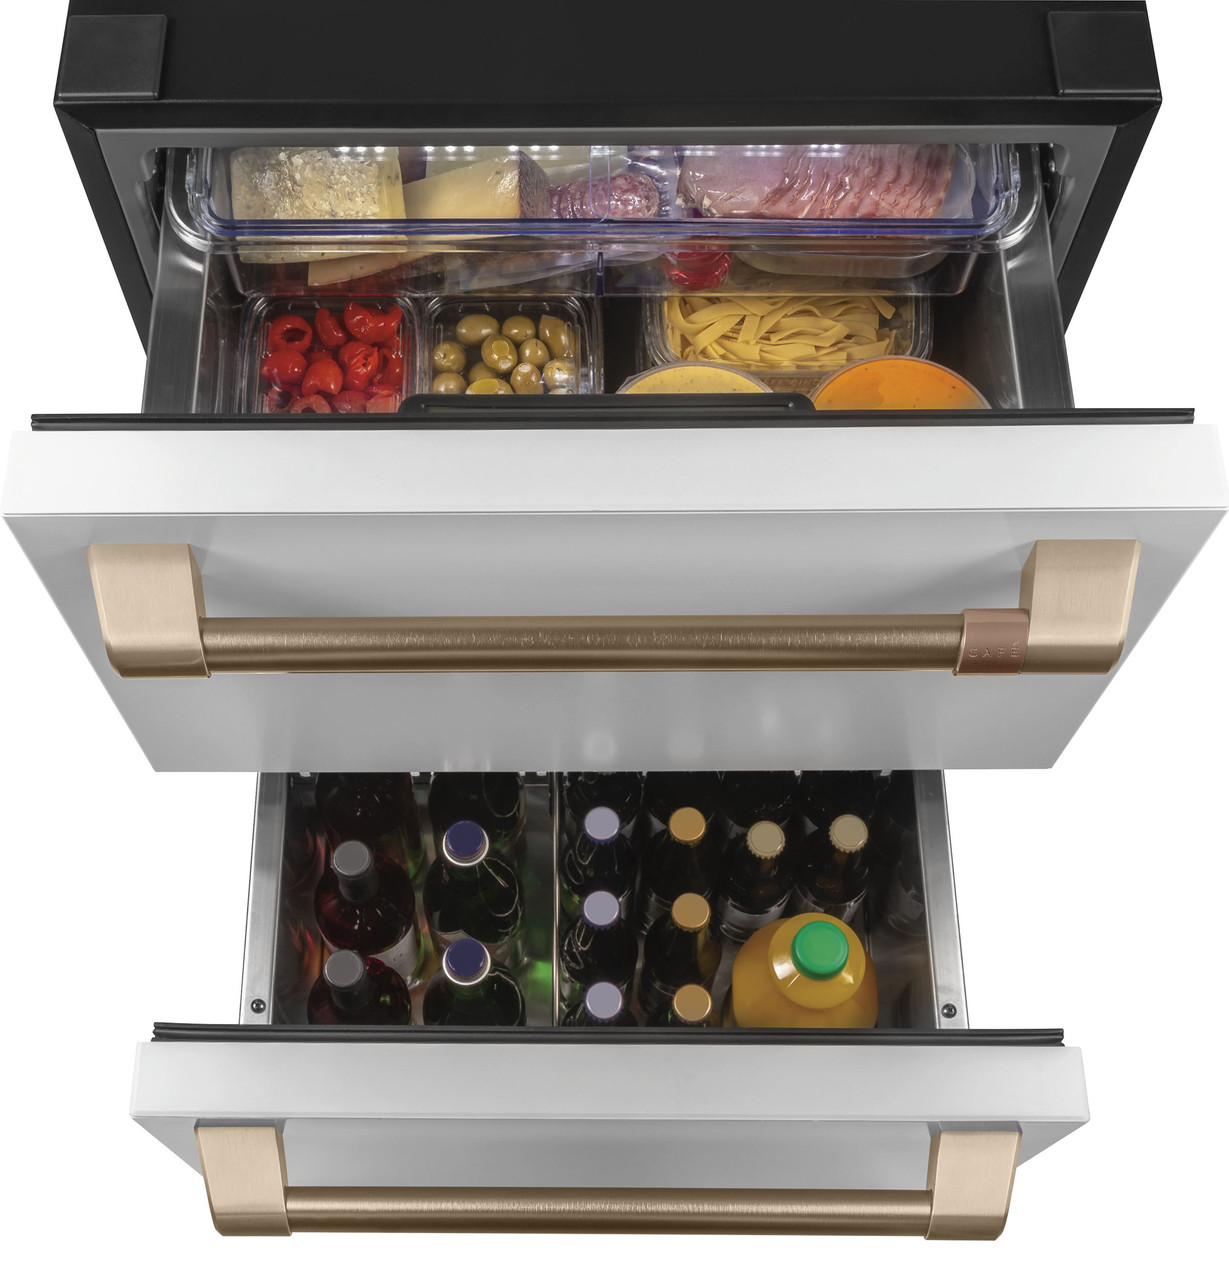 Cafe 24 in. Built-In 5.7 cu. ft. Refrigerator Drawer - Stainless